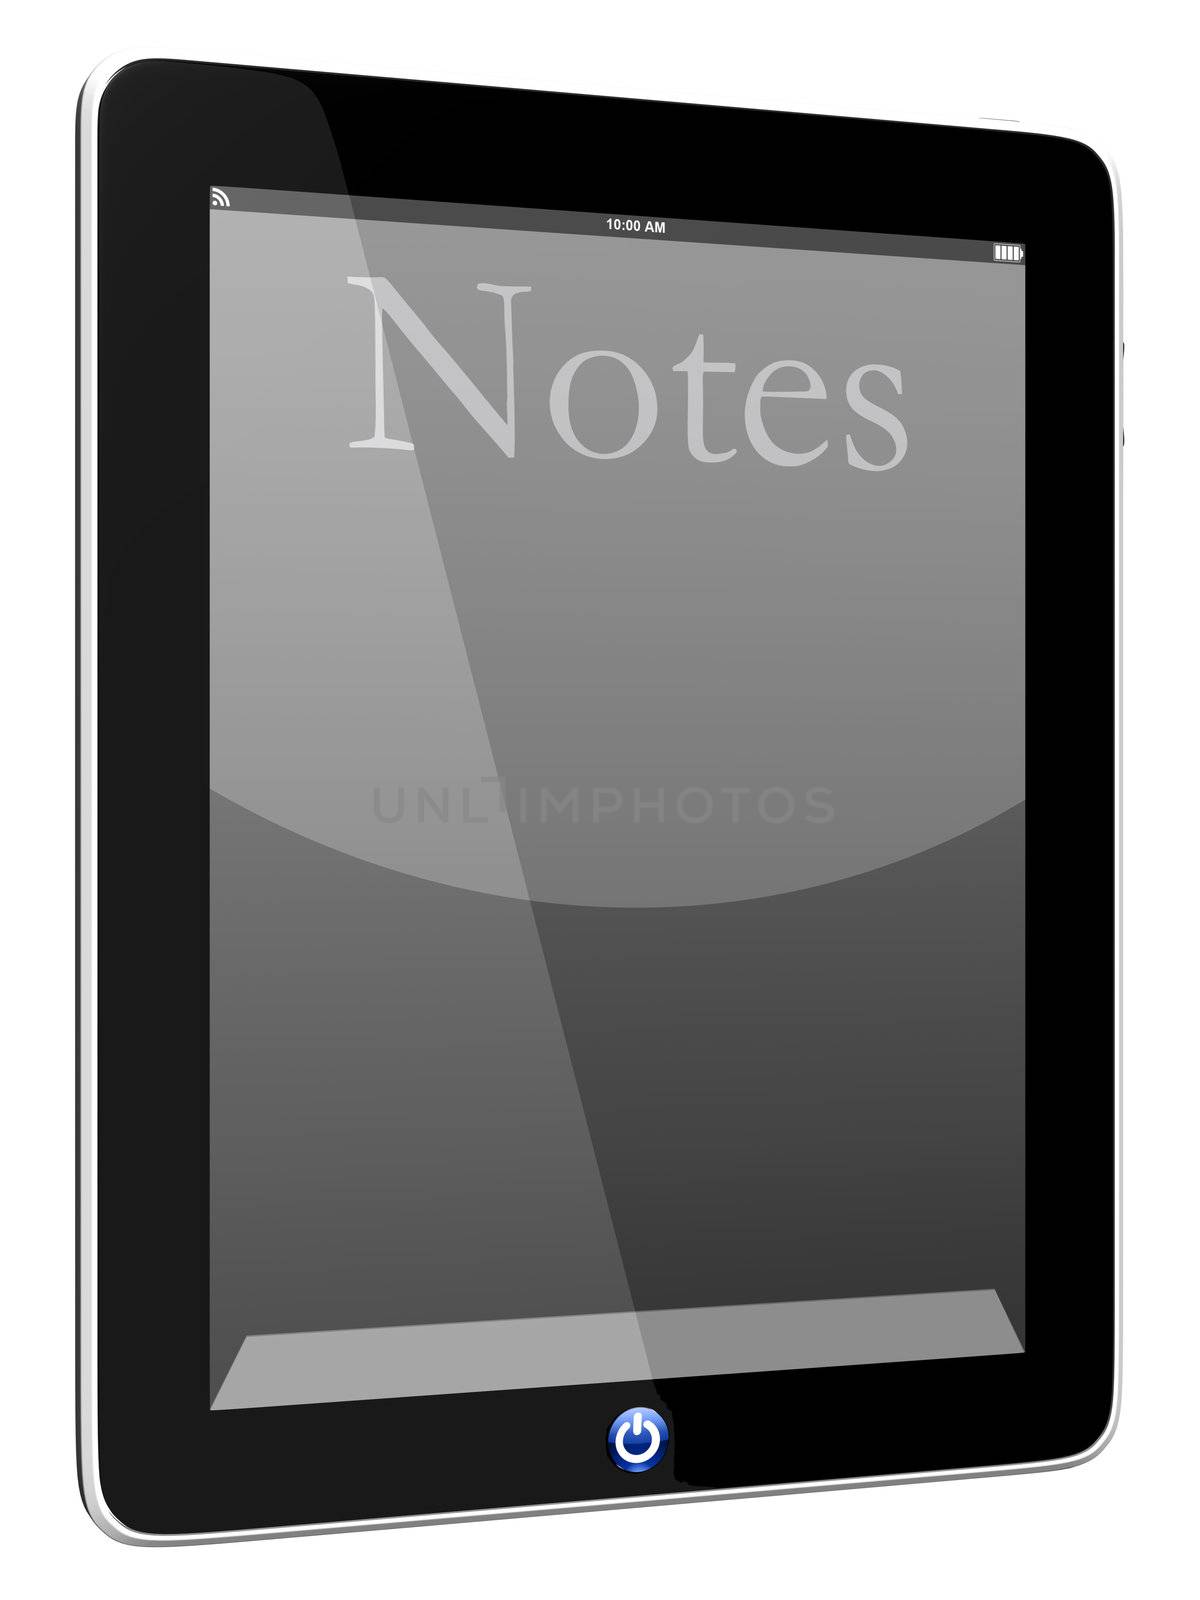 Notes on Tablet PC Computer by adamr